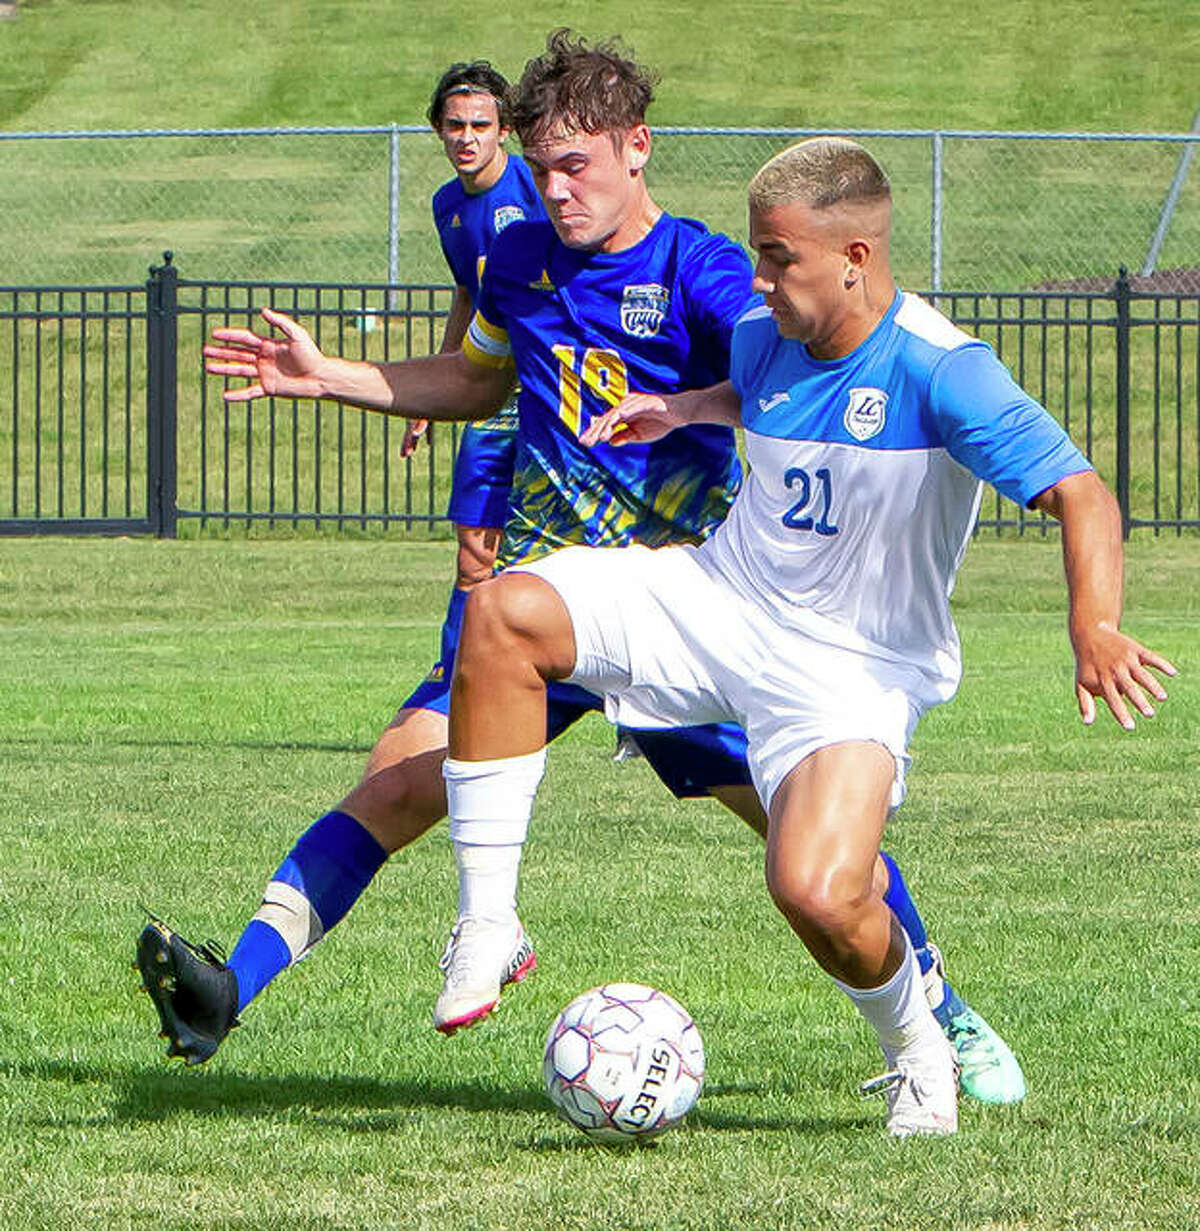 Lewis and Clark Community College’s Dudu Rodrigues (21) battles for the ball with Logan Cupi of Illinois Central College Sunday at LCCC’s Tim Rooney Stadium.